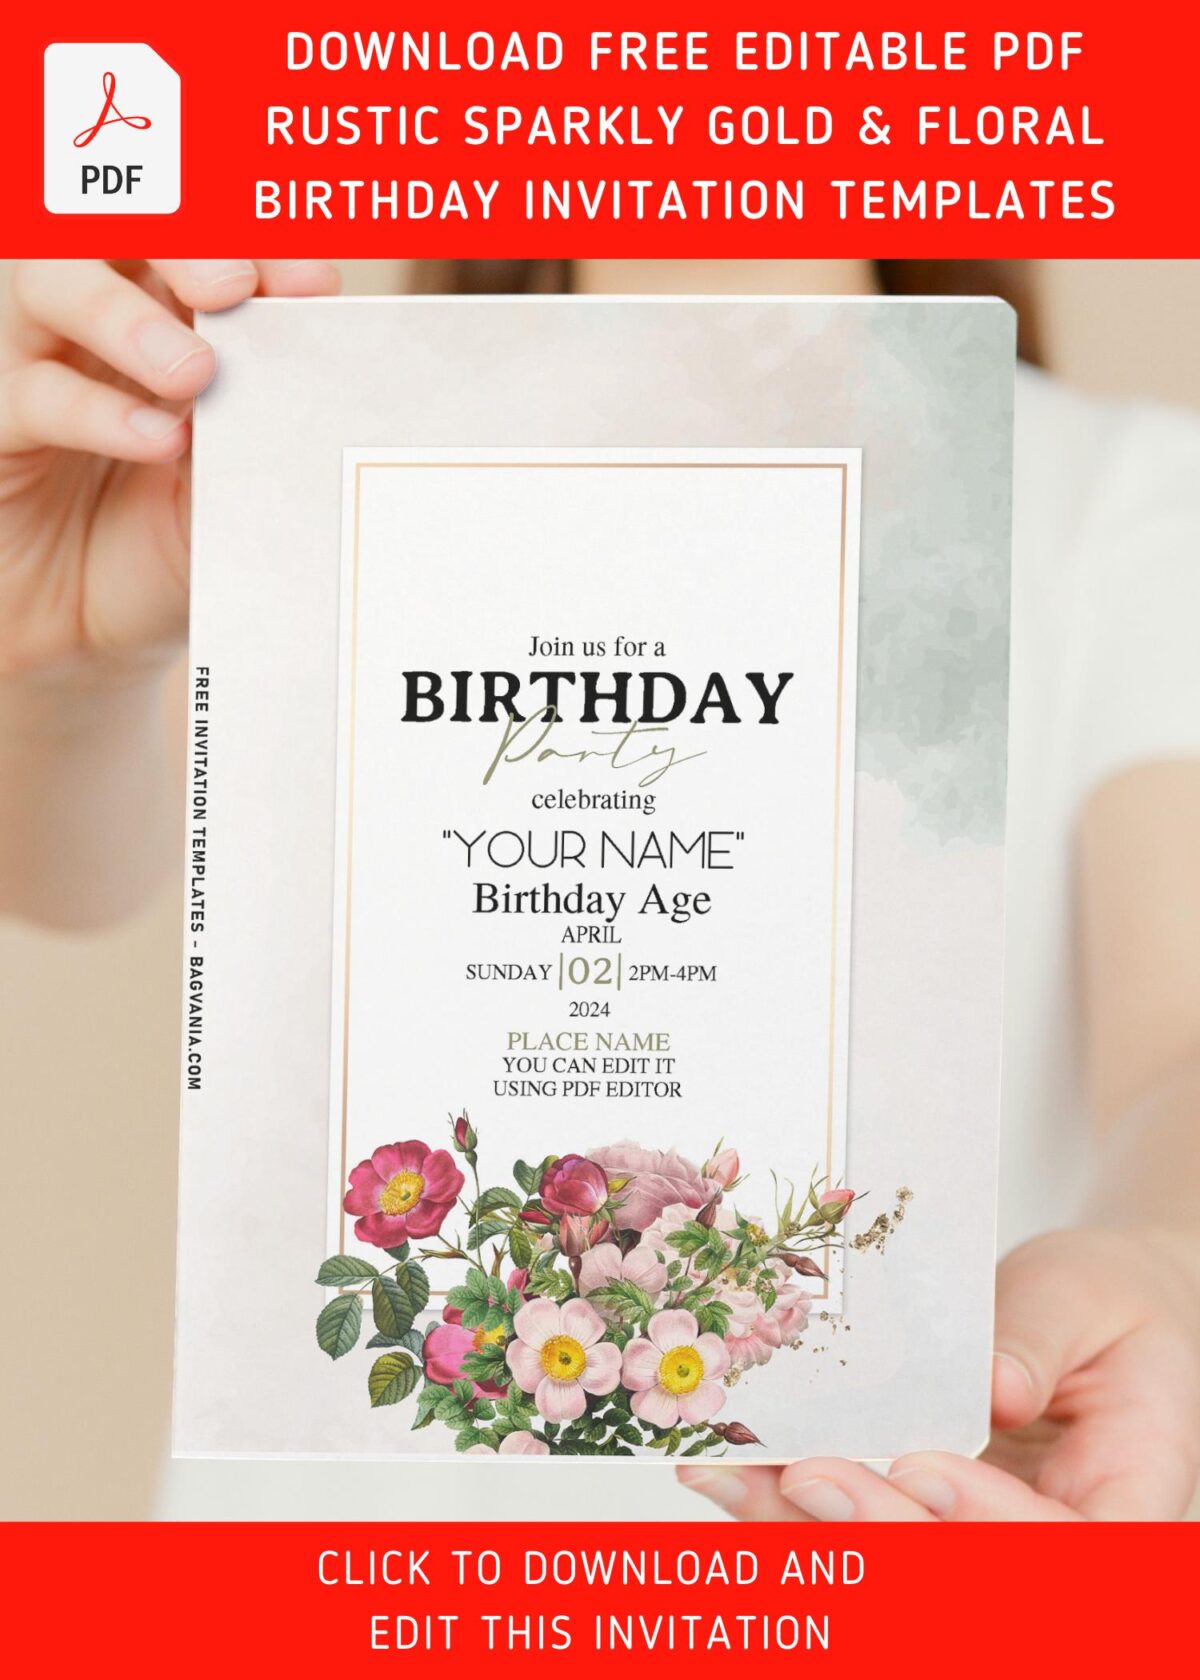 (Free Editable PDF) Dusty Bright And Moody Garden Rose Birthday Invitation Templates with editable text